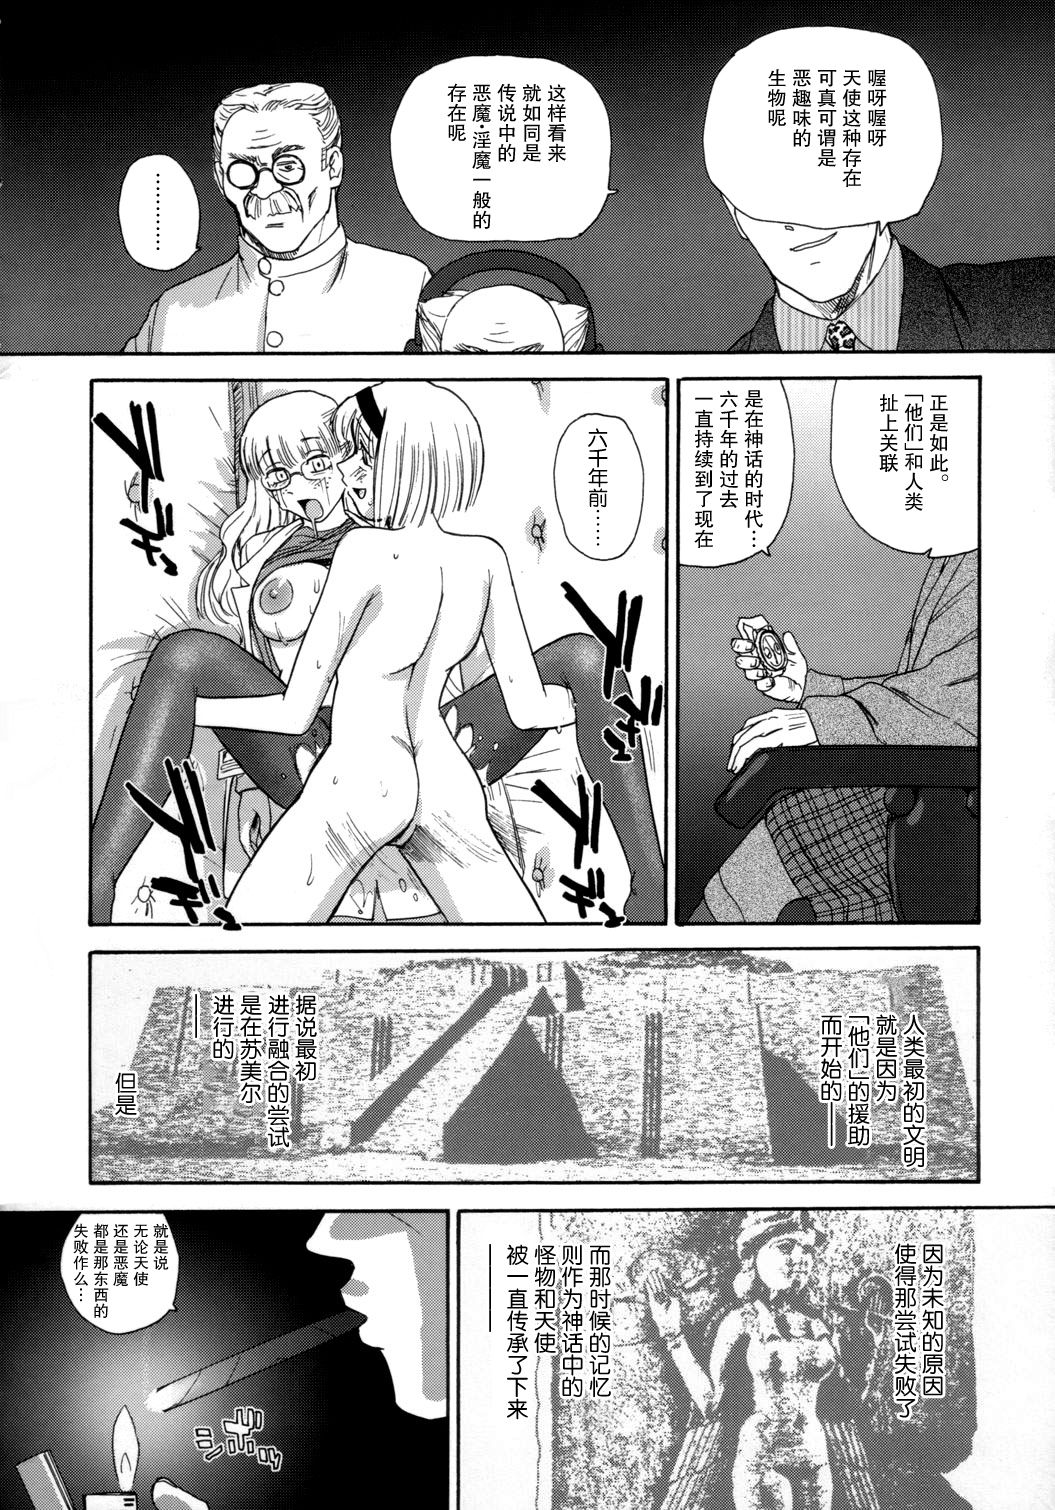 (C72) [Behind Moon (Q)] Dulce Report 9 | 达西报告 9 [Chinese] [哈尼喵汉化组] [Decensored] page 42 full